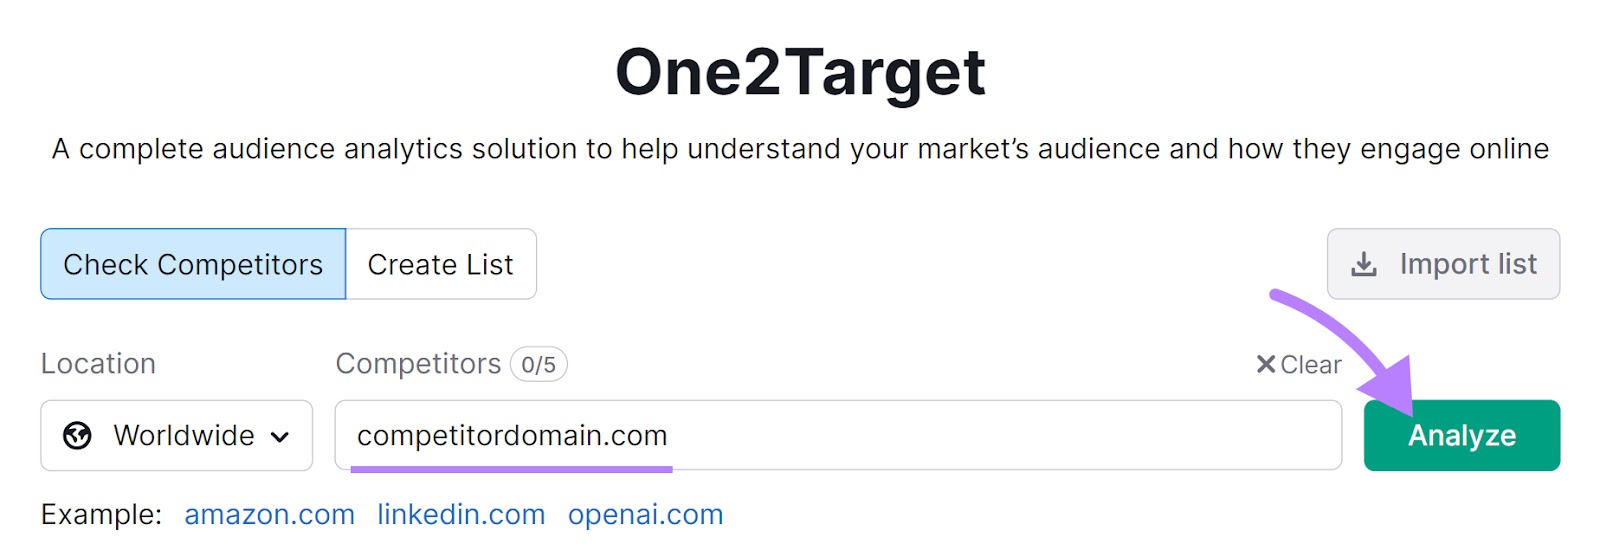 An example competitor's domain entered into One2Target search bar